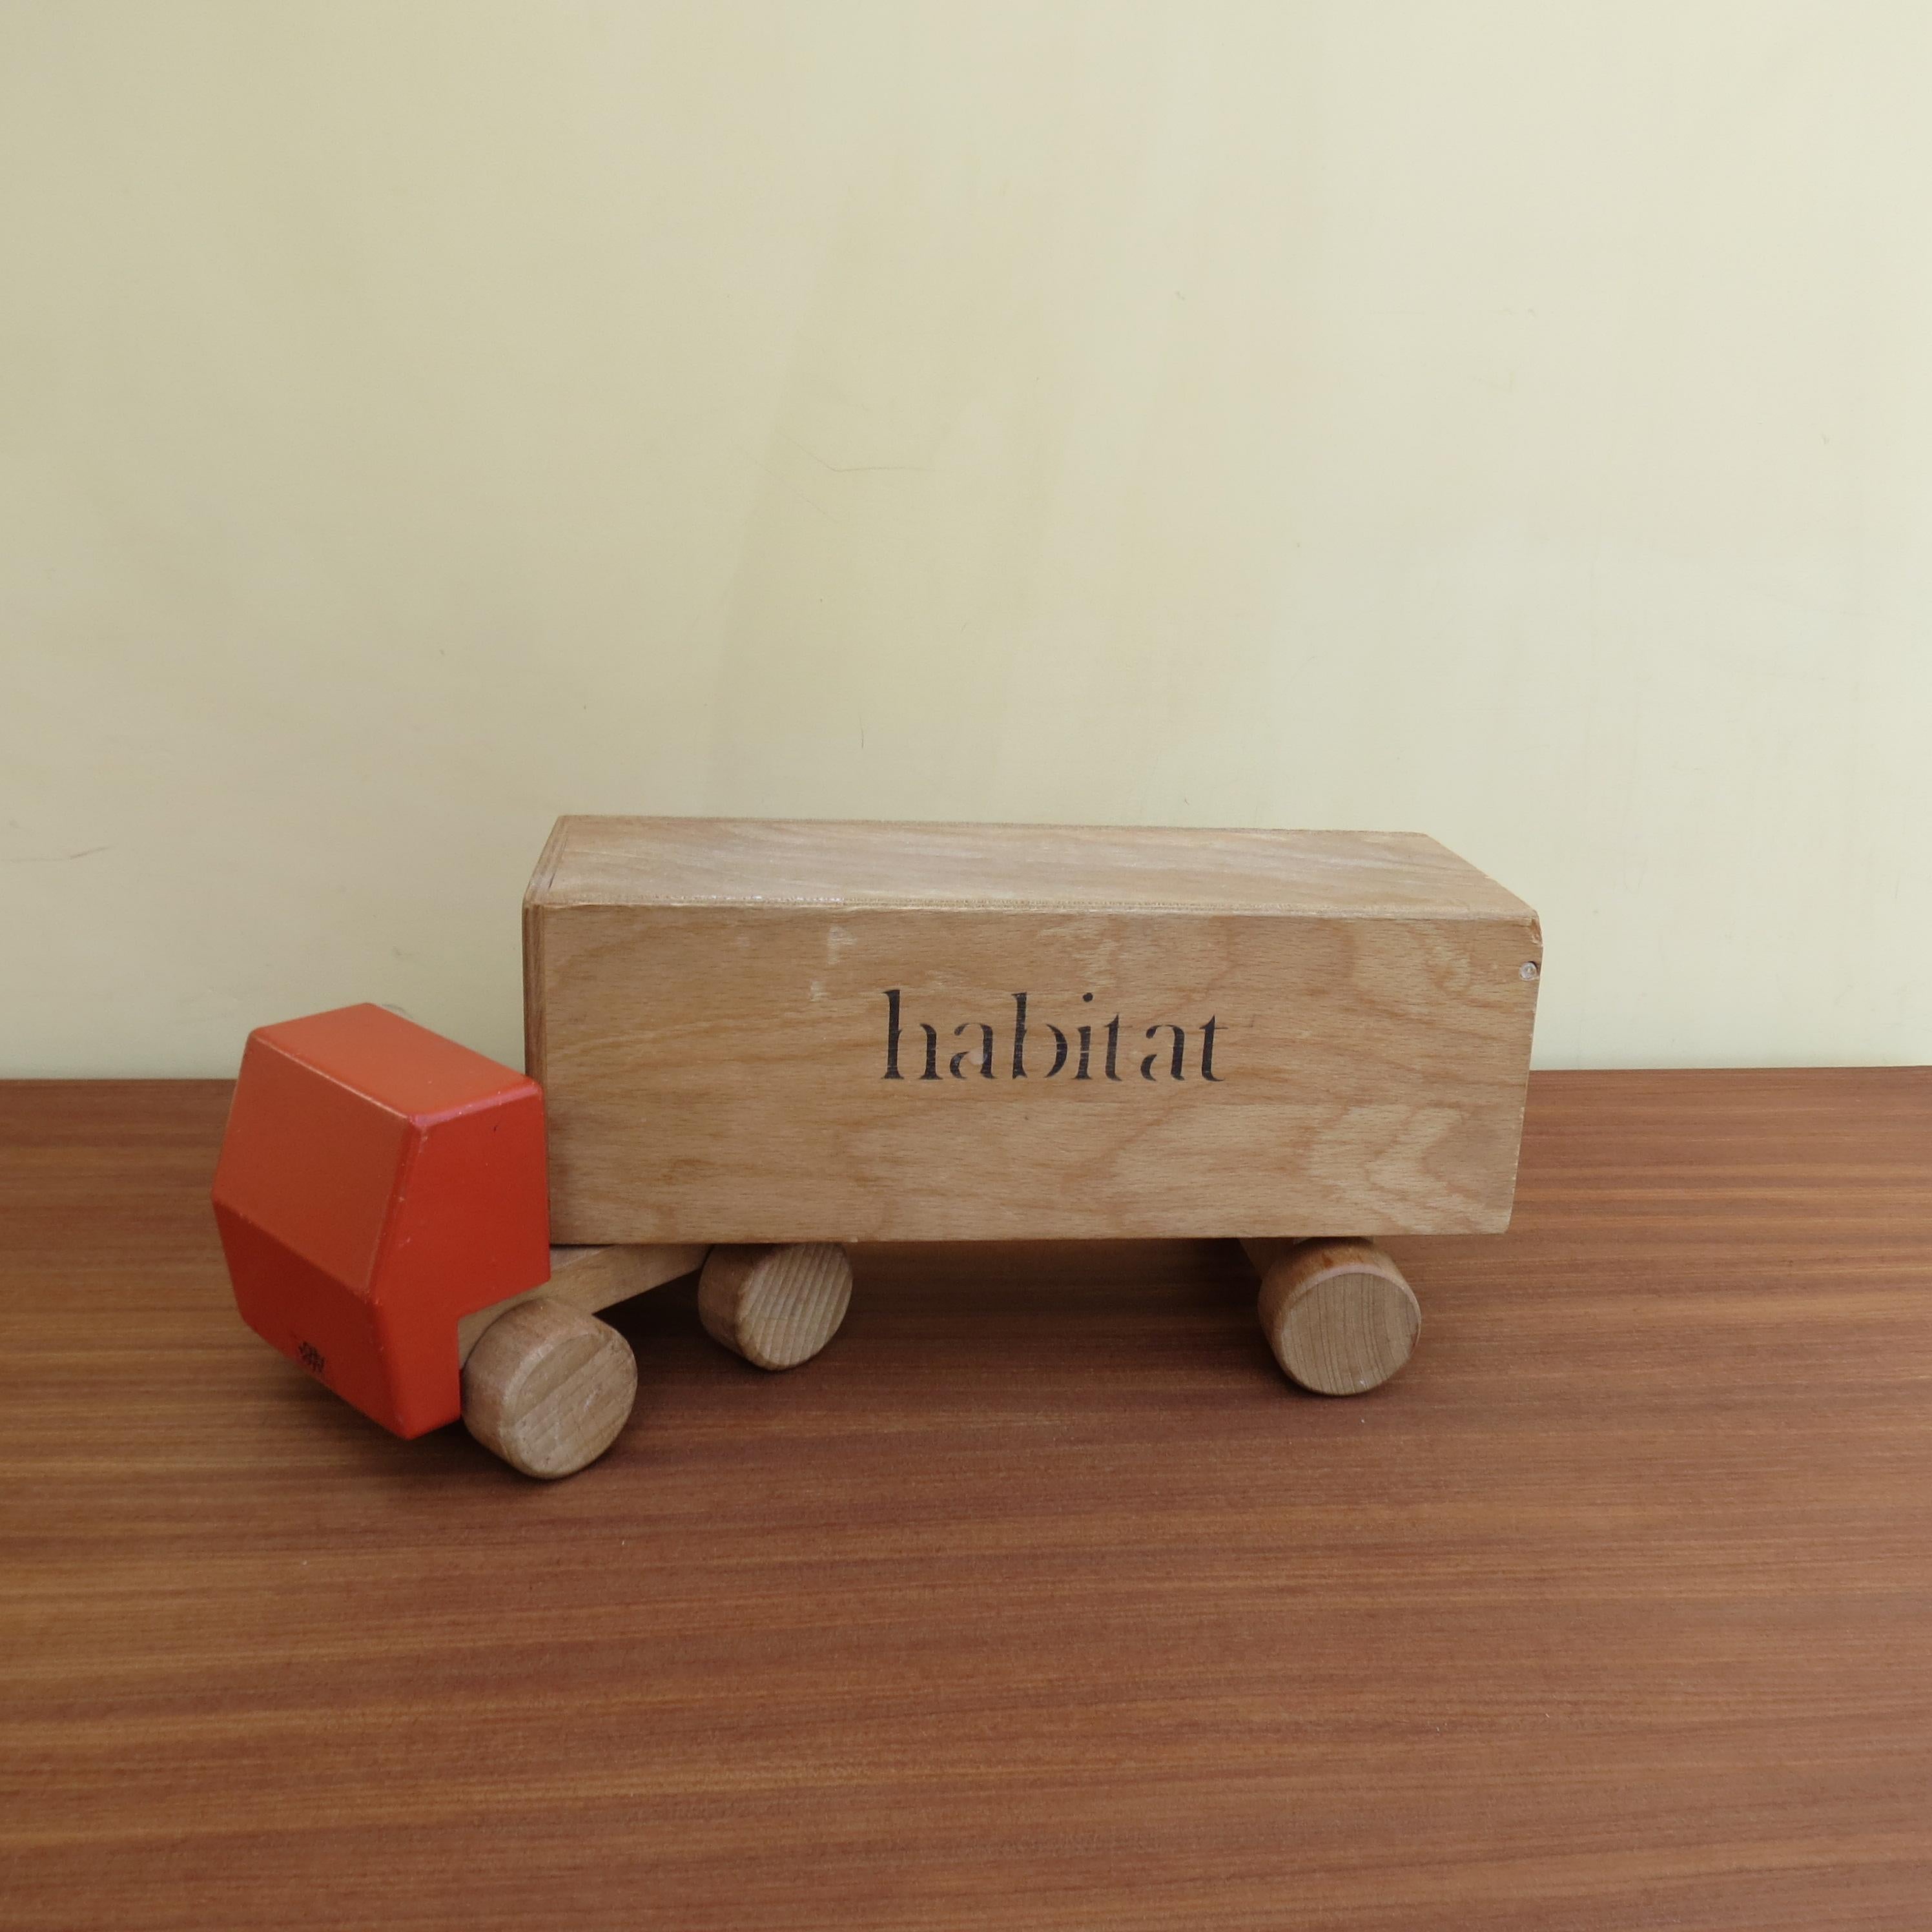 Mid-Century Modern 1970s Vintage Advertising Toy Lorry for Habitat Wooden Toy Lorry by Ryk Heuff